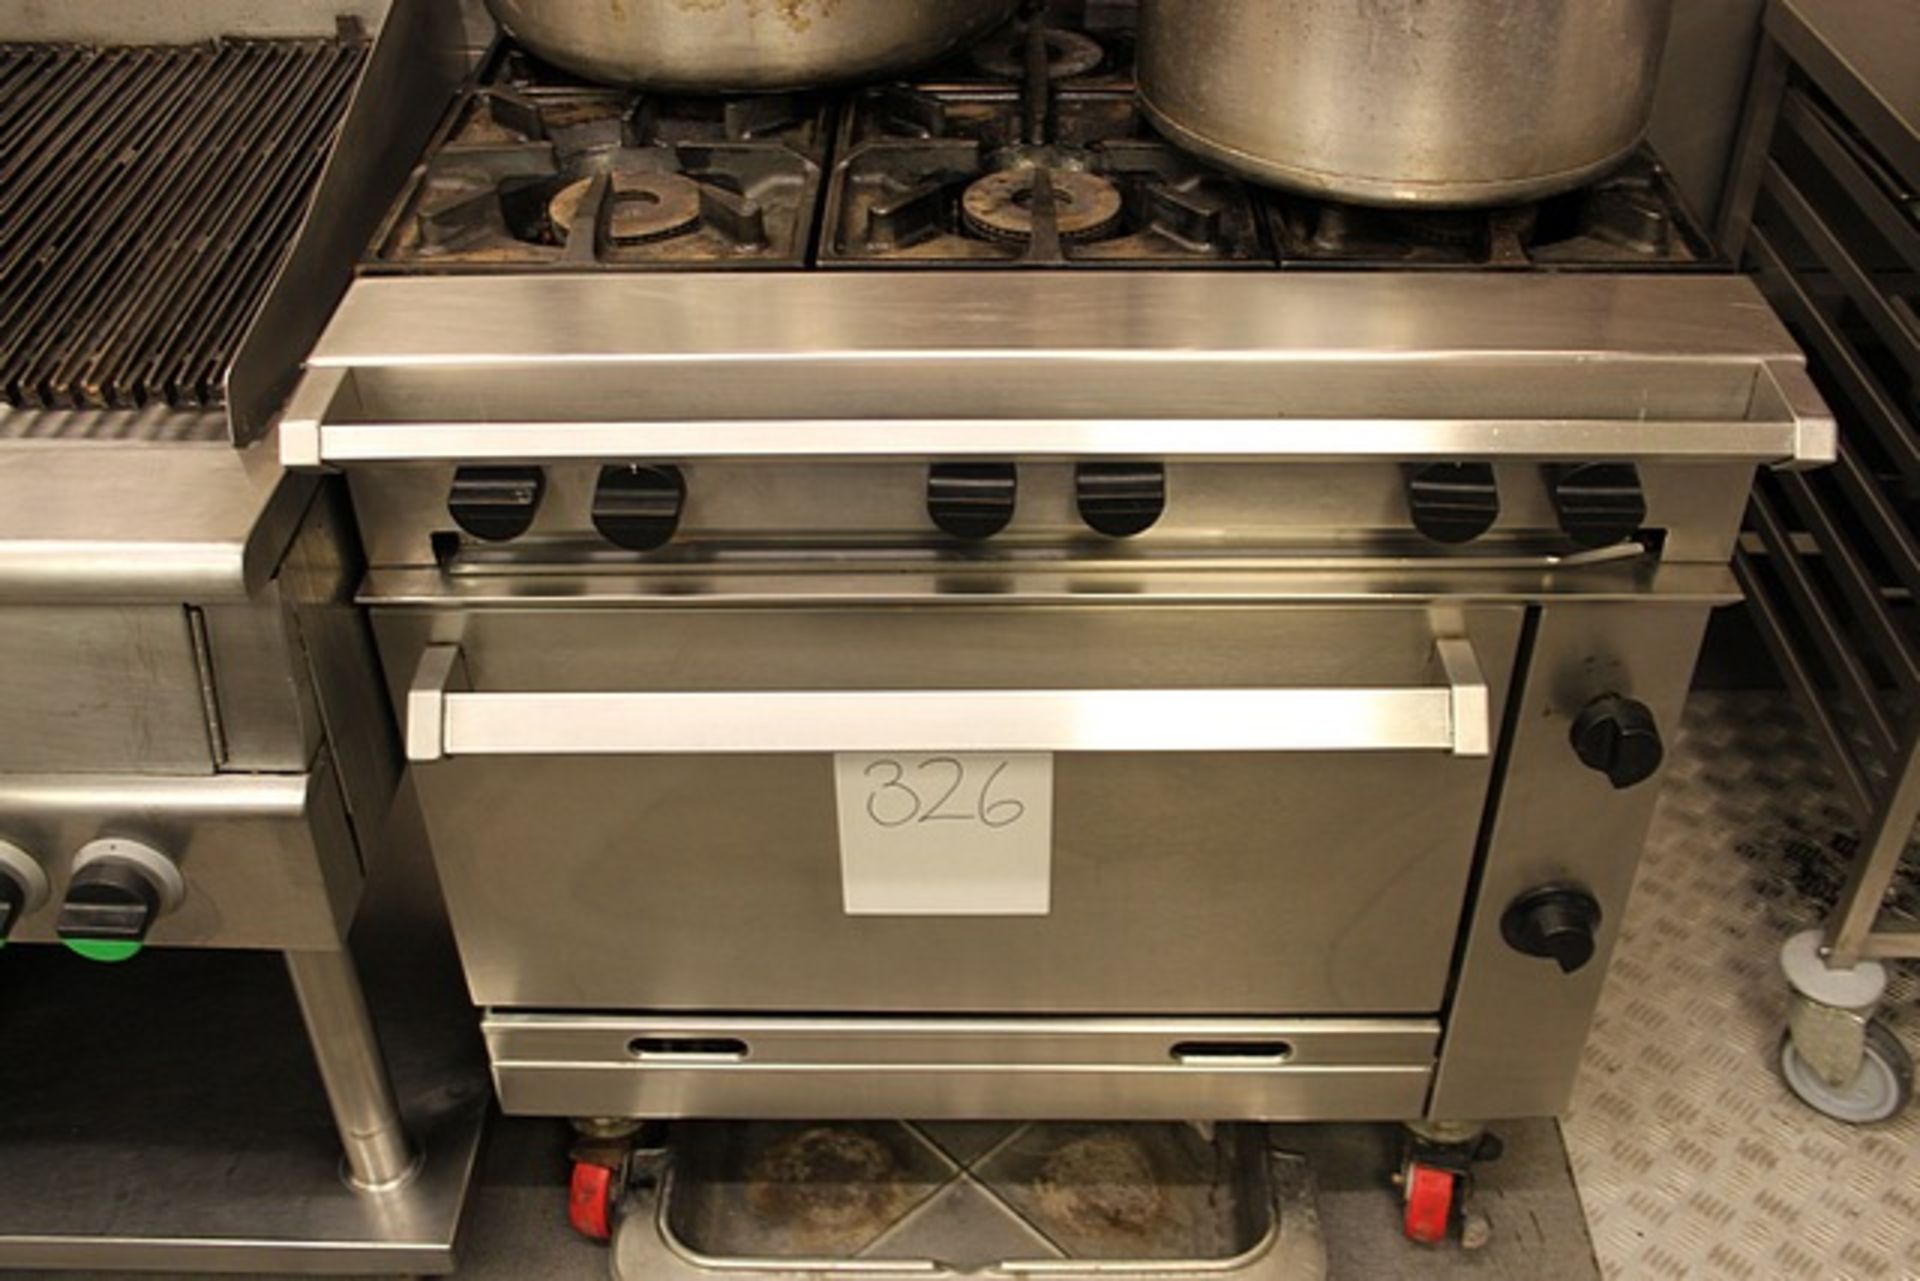 Falcon Chieftain Six Burner Gas Oven Range Oven capacity H325 x W650 x D530mm Natural Gas 60.2kW, - Image 2 of 2